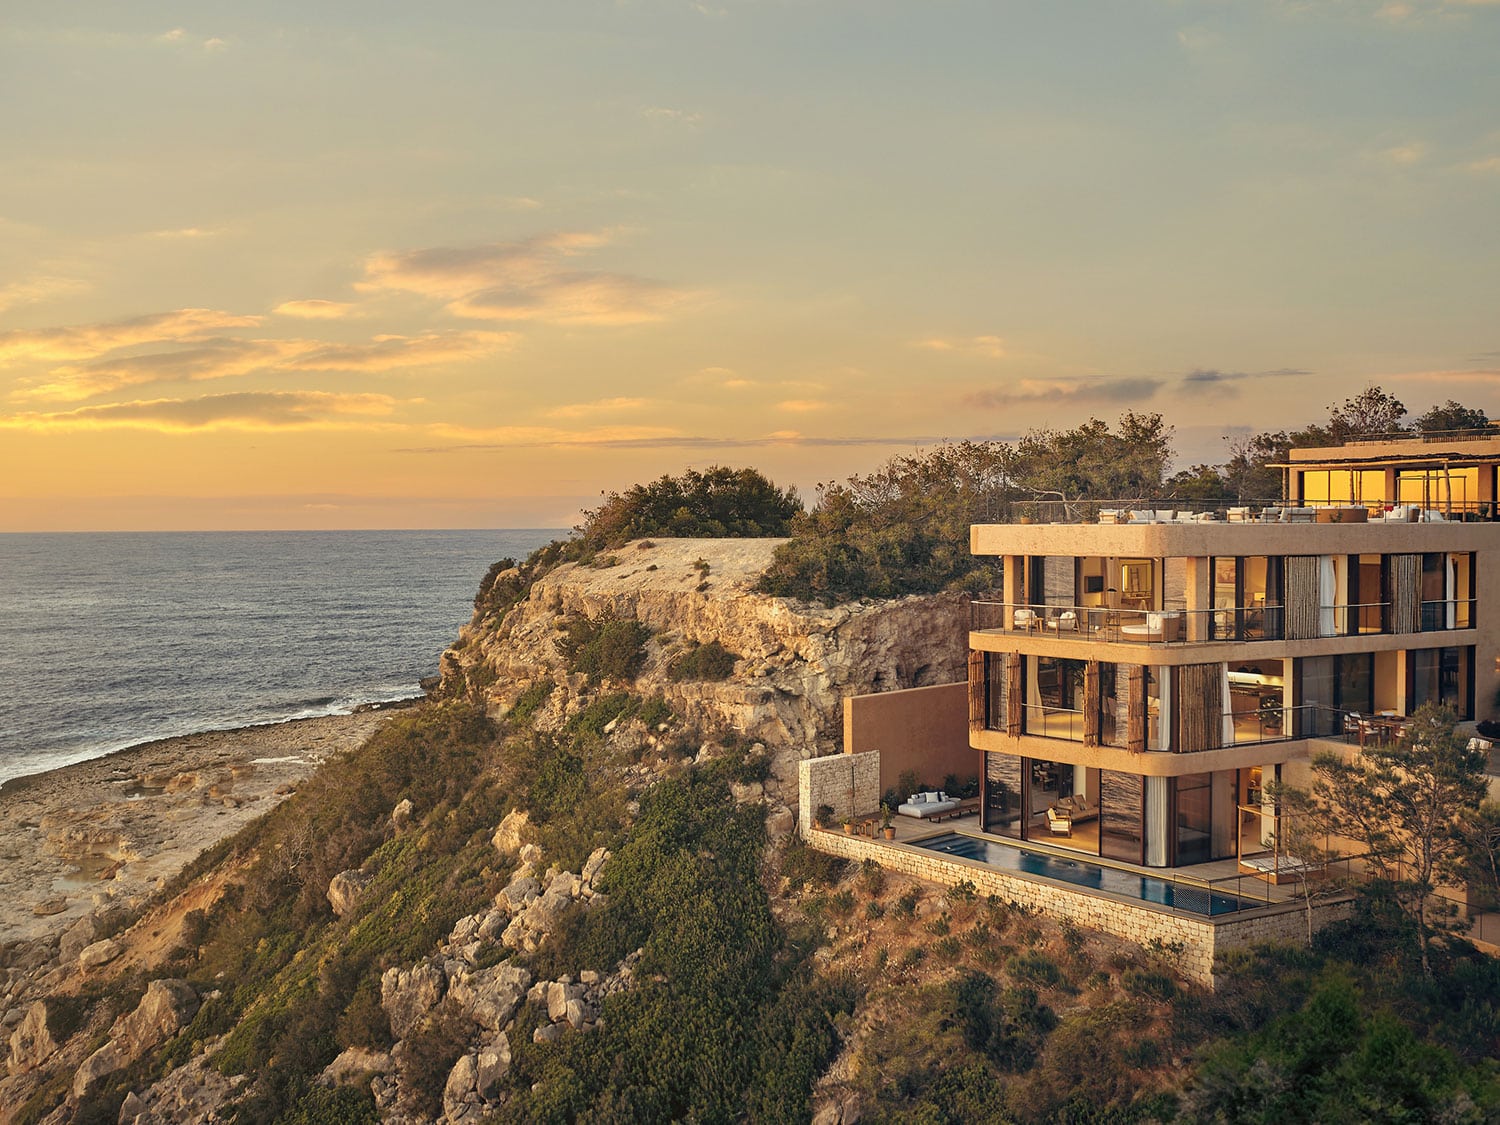 An exterior view of the five-bedroom Cliffhanger mansion at Six Senses Ibiza in the Balearic Islands, Spain.